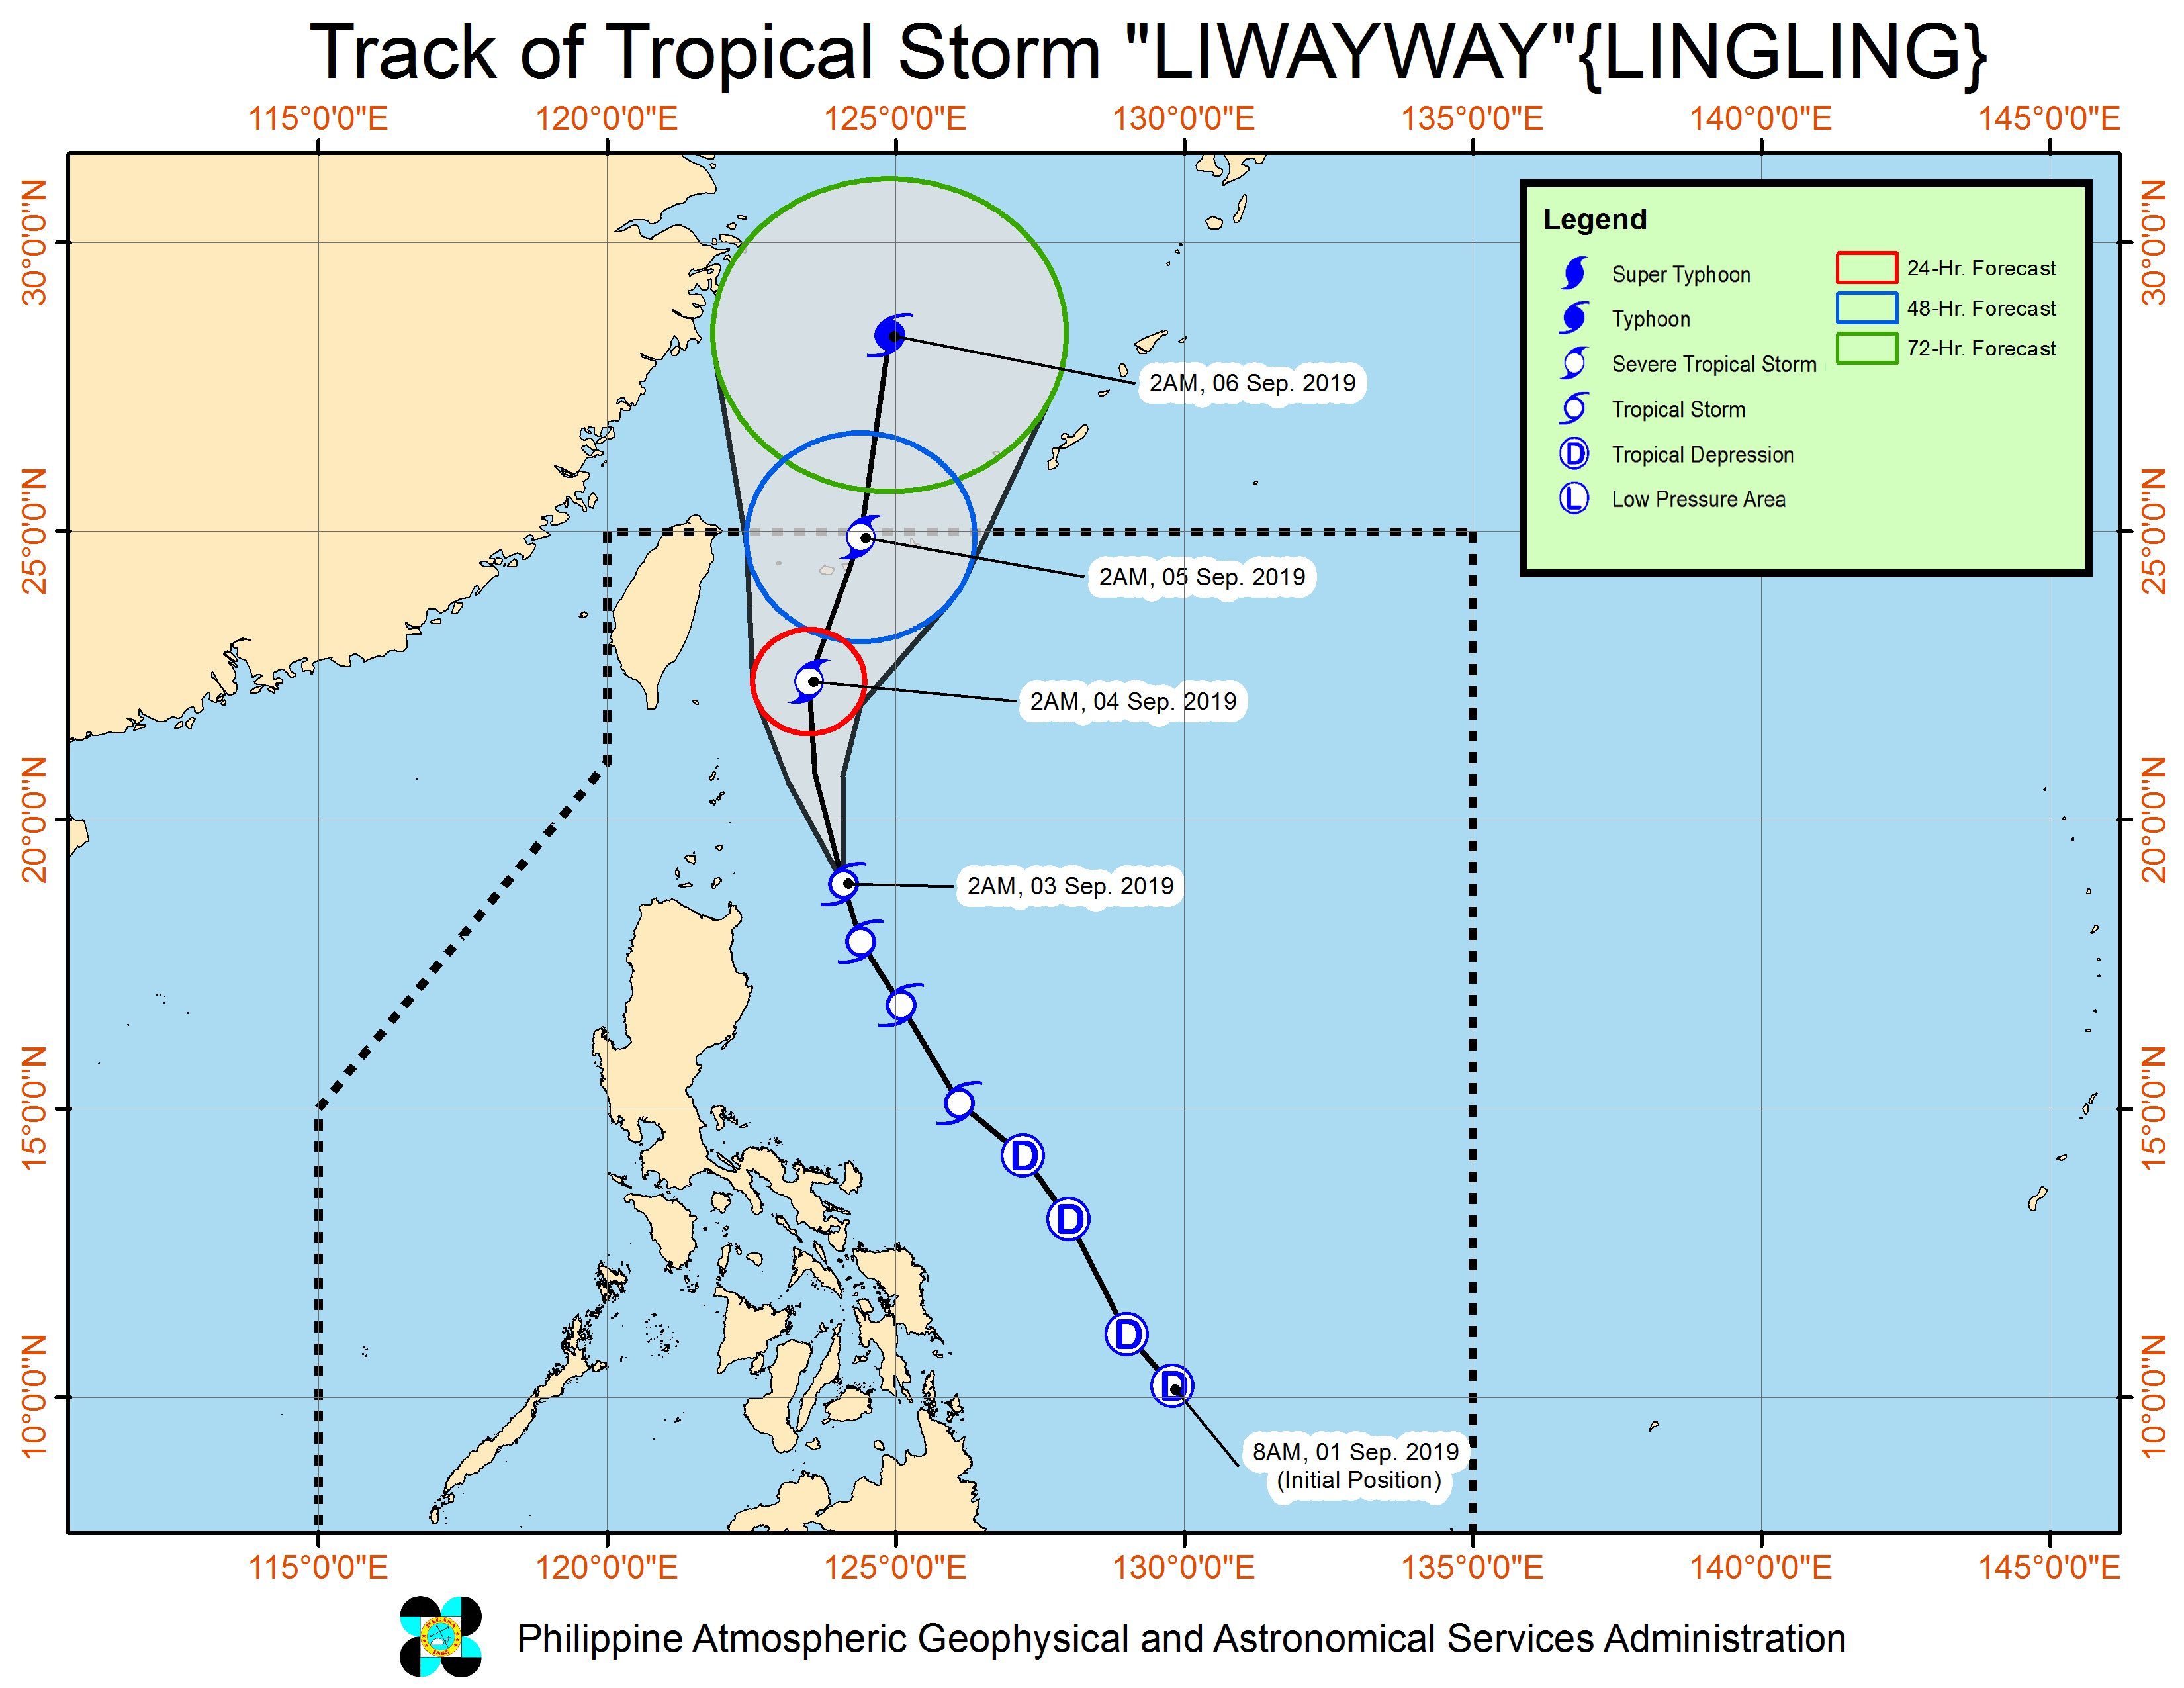 Forecast track of Tropical Storm Liwayway (Lingling) as of September 3, 2019, 5 am. Image from PAGASA 